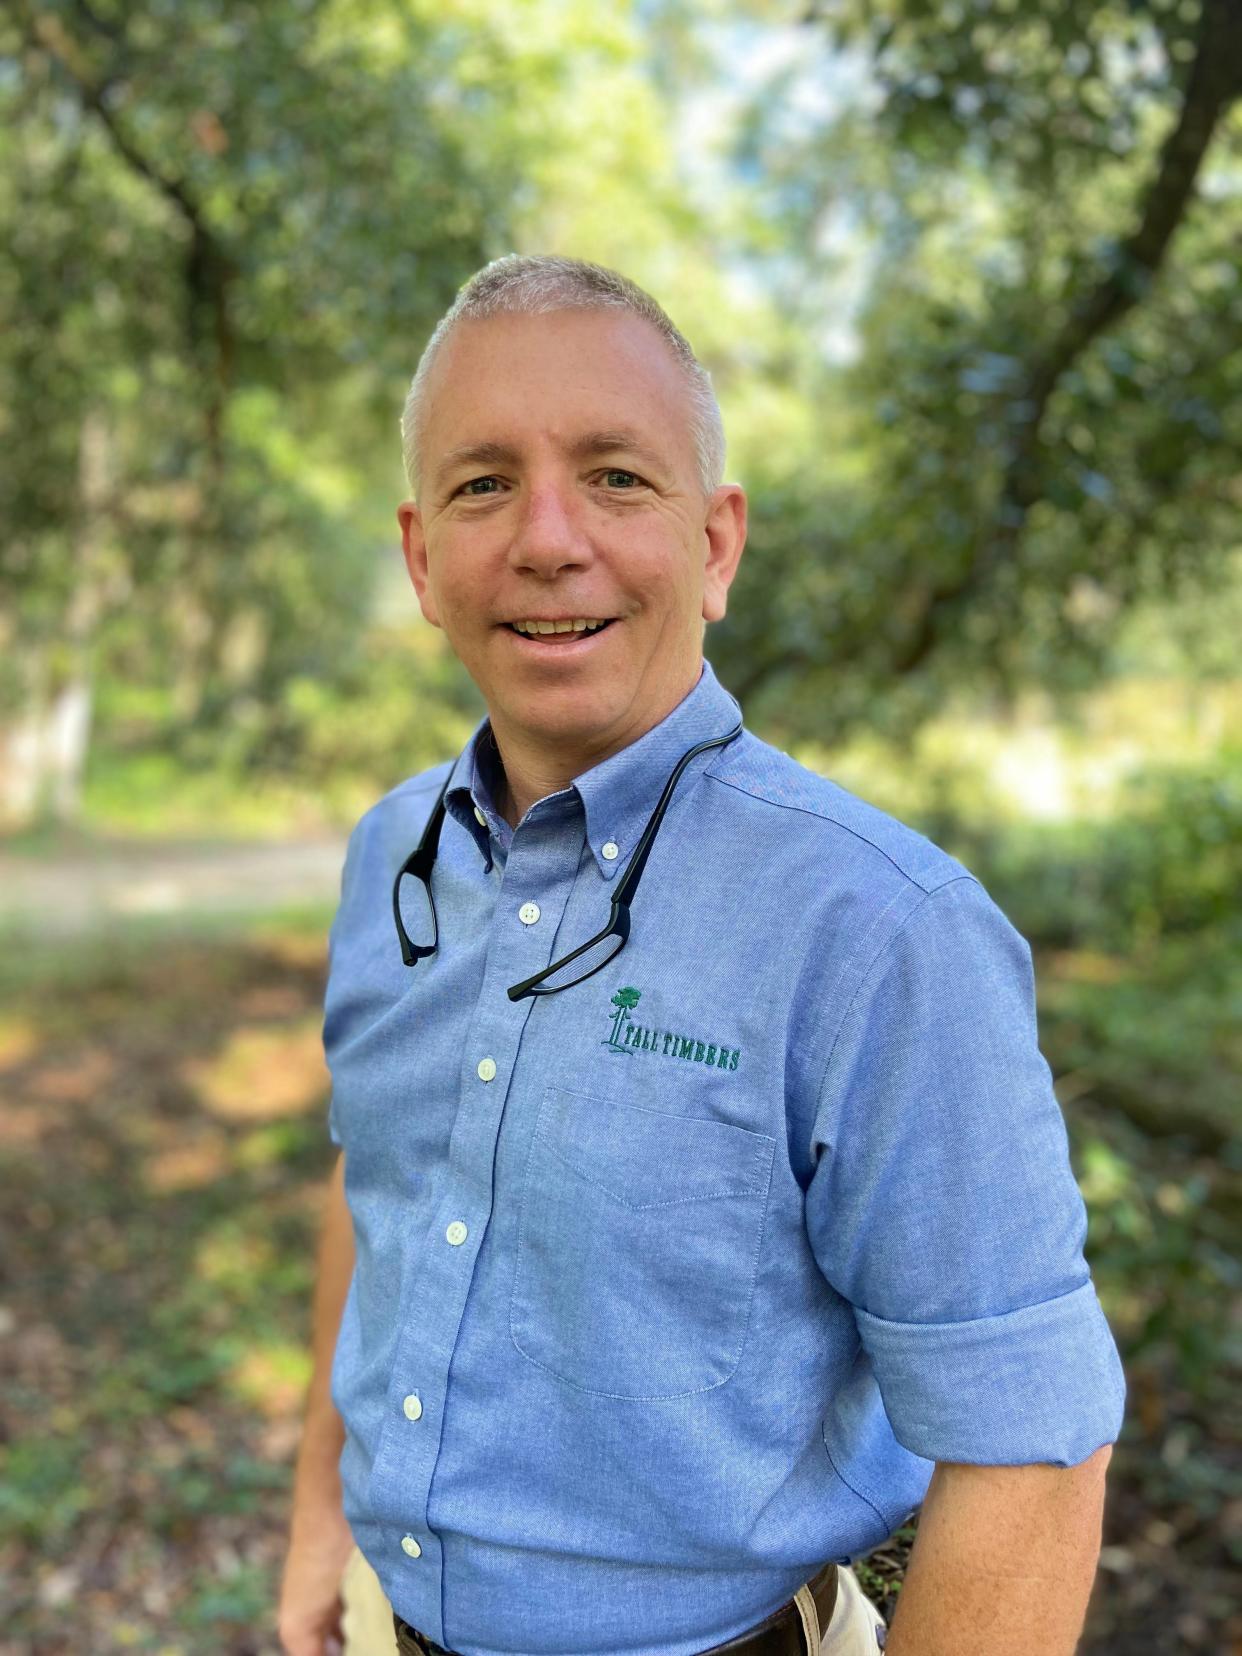 Shane Wellendorf is the Land Conservancy Director for Tall Timbers Research Station and Land Conservancy, working in the Red Hills and Big Bend of north Florida.